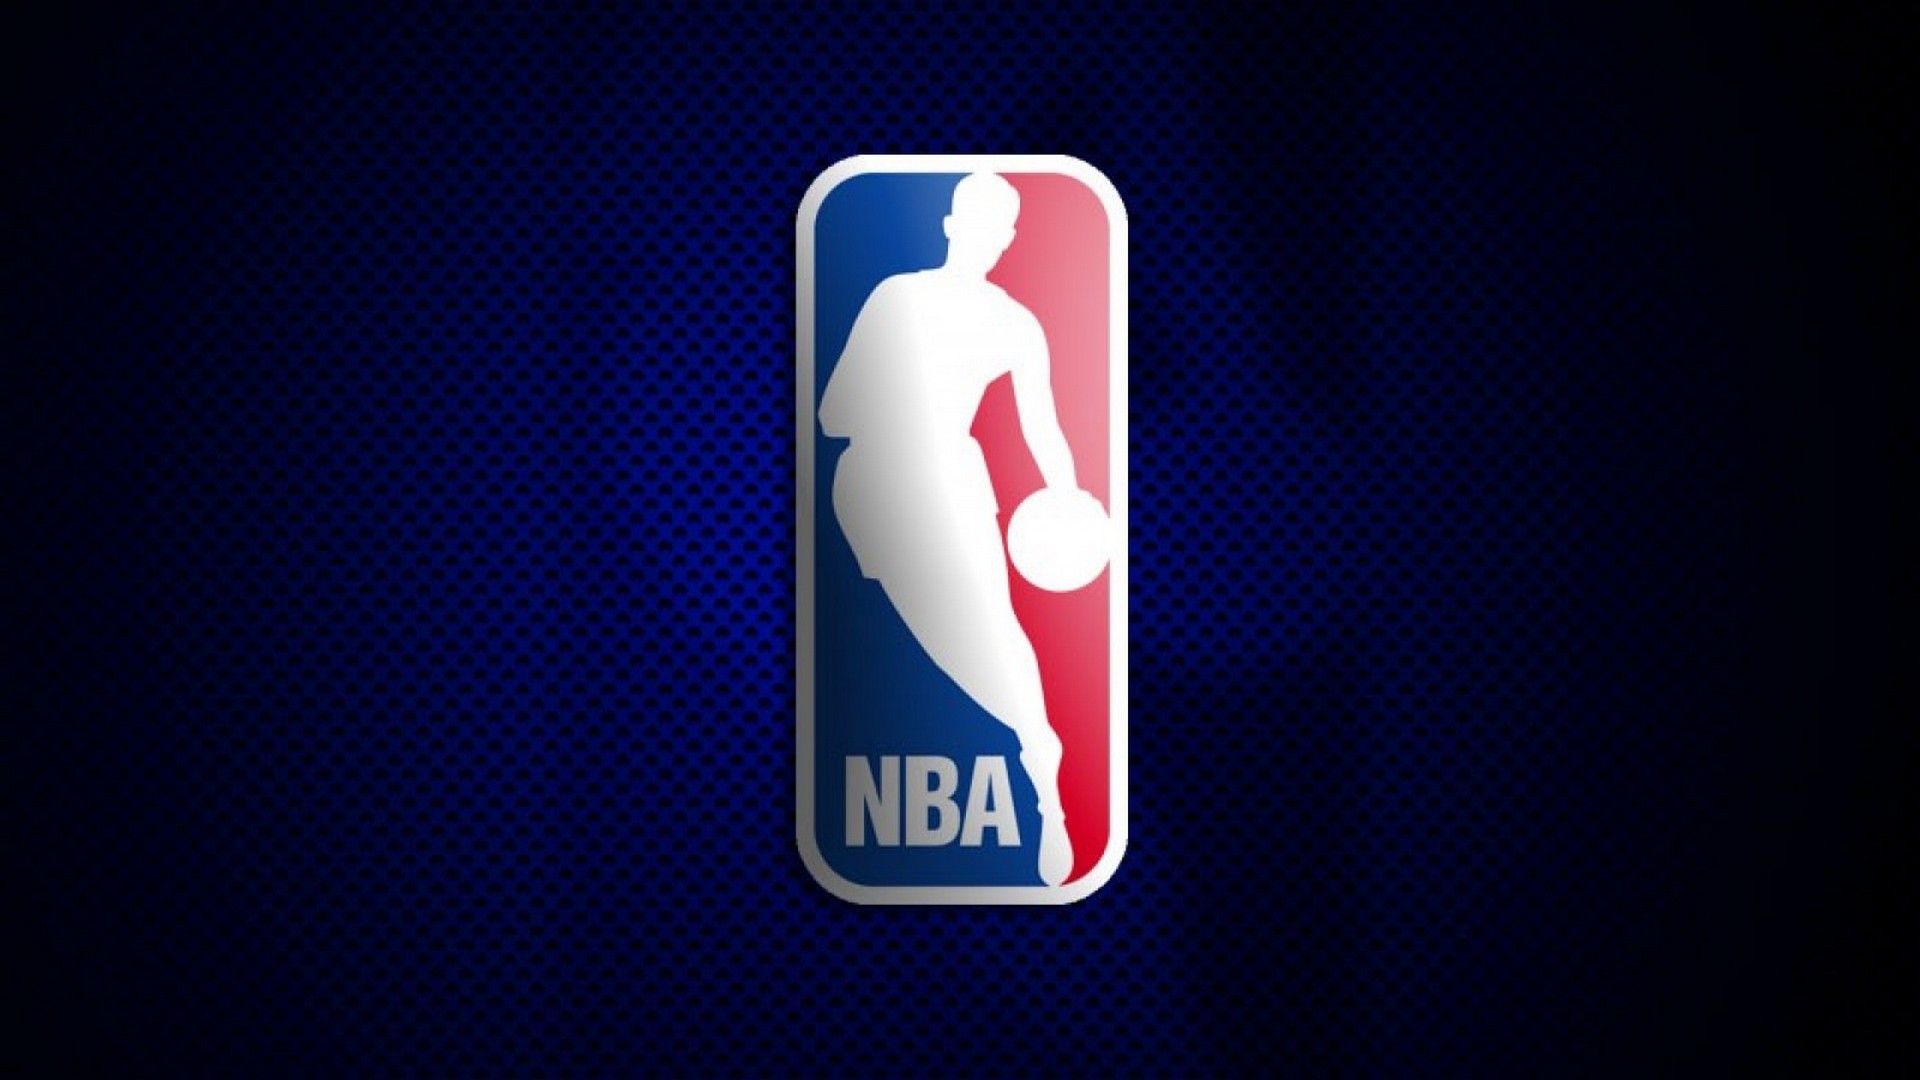 NBA Desktop Wallpaper with image dimensions 1920x1080 pixel. You can make this wallpaper for your Desktop Computer Backgrounds, Windows or Mac Screensavers, iPhone Lock screen, Tablet or Android and another Mobile Phone device